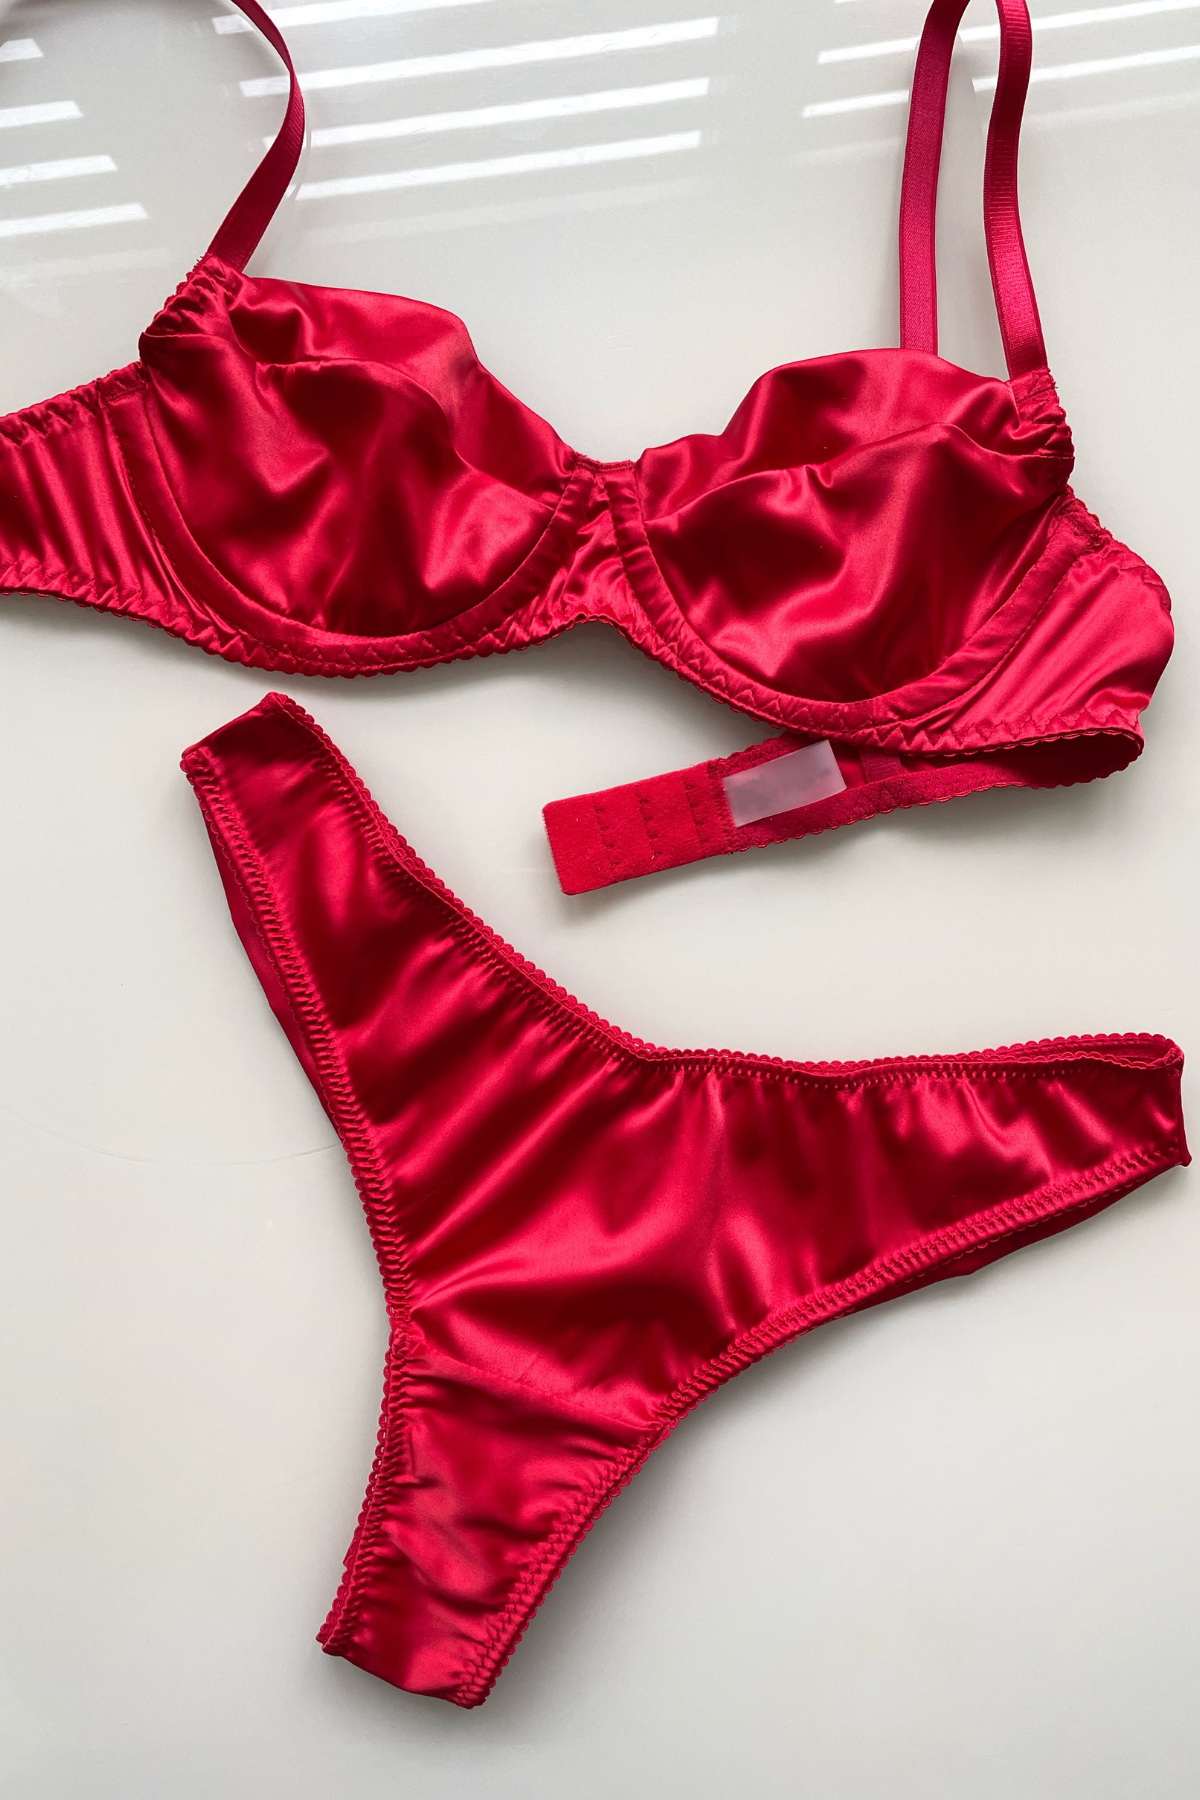 Premium New Amour Red Lingerie Set - Angie's Showroom